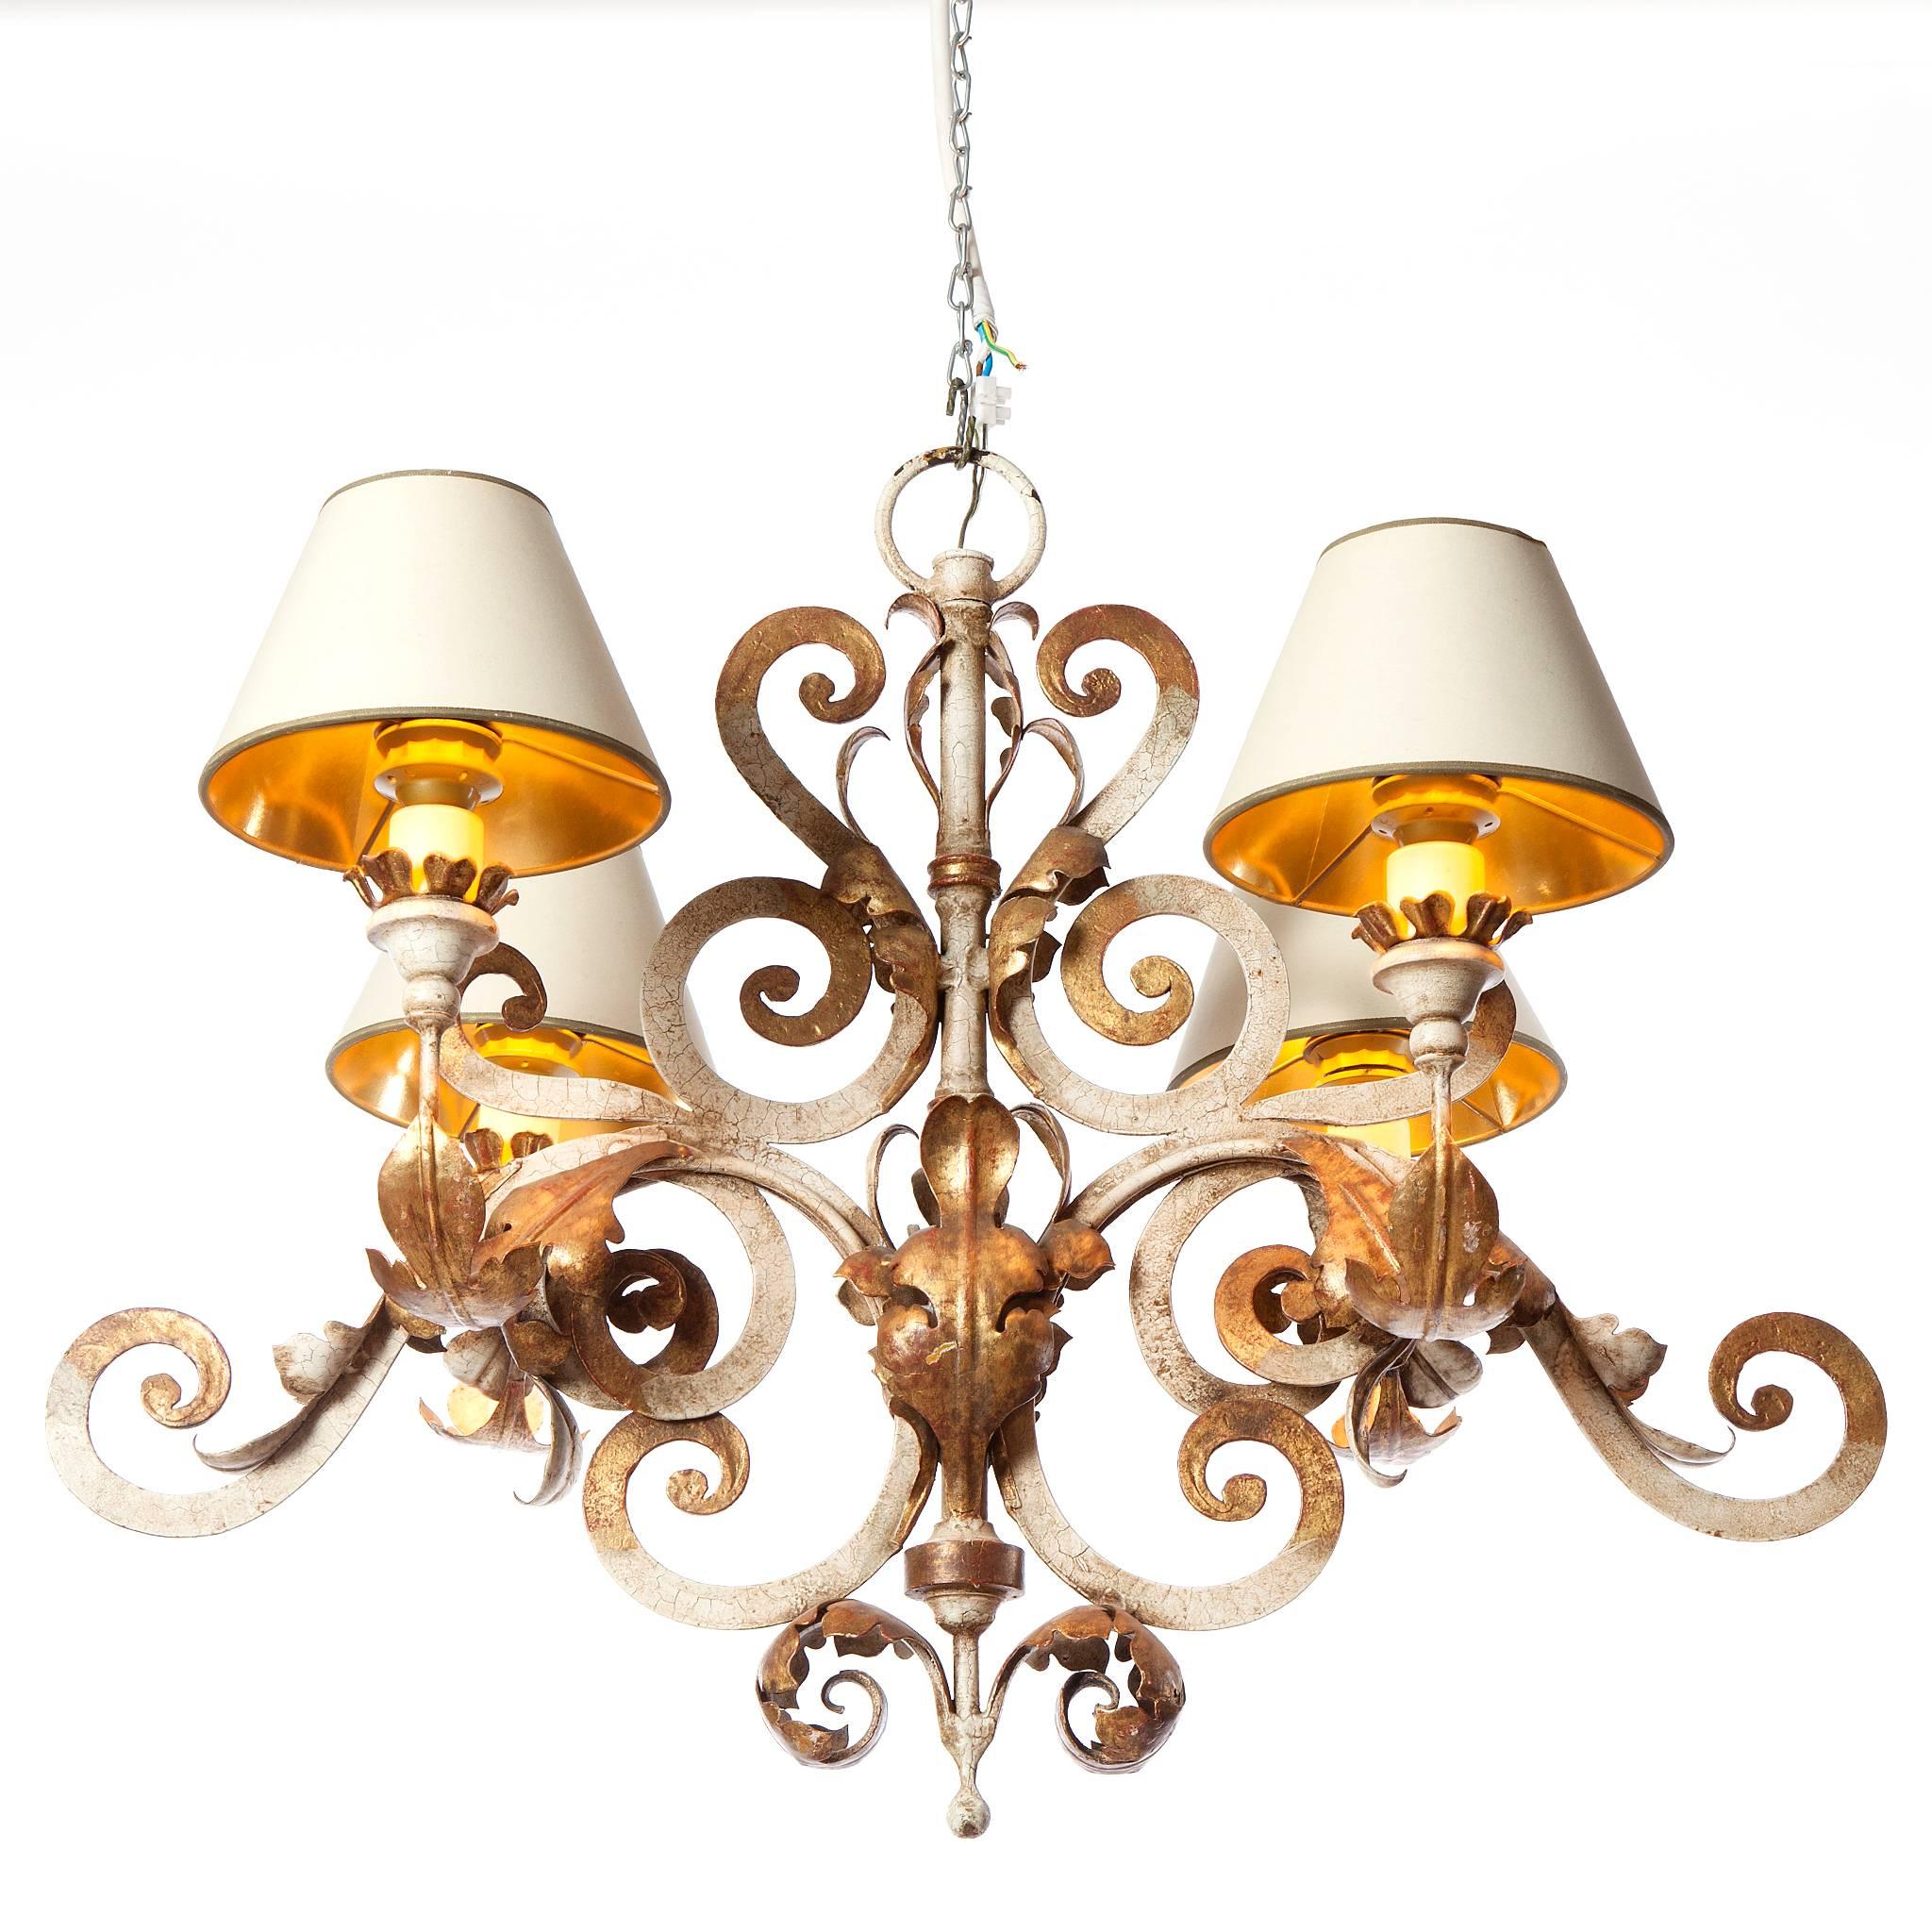 1900s Four-Light Polychrome Gold-Plated Wrought Iron Chandelier by Caldwell